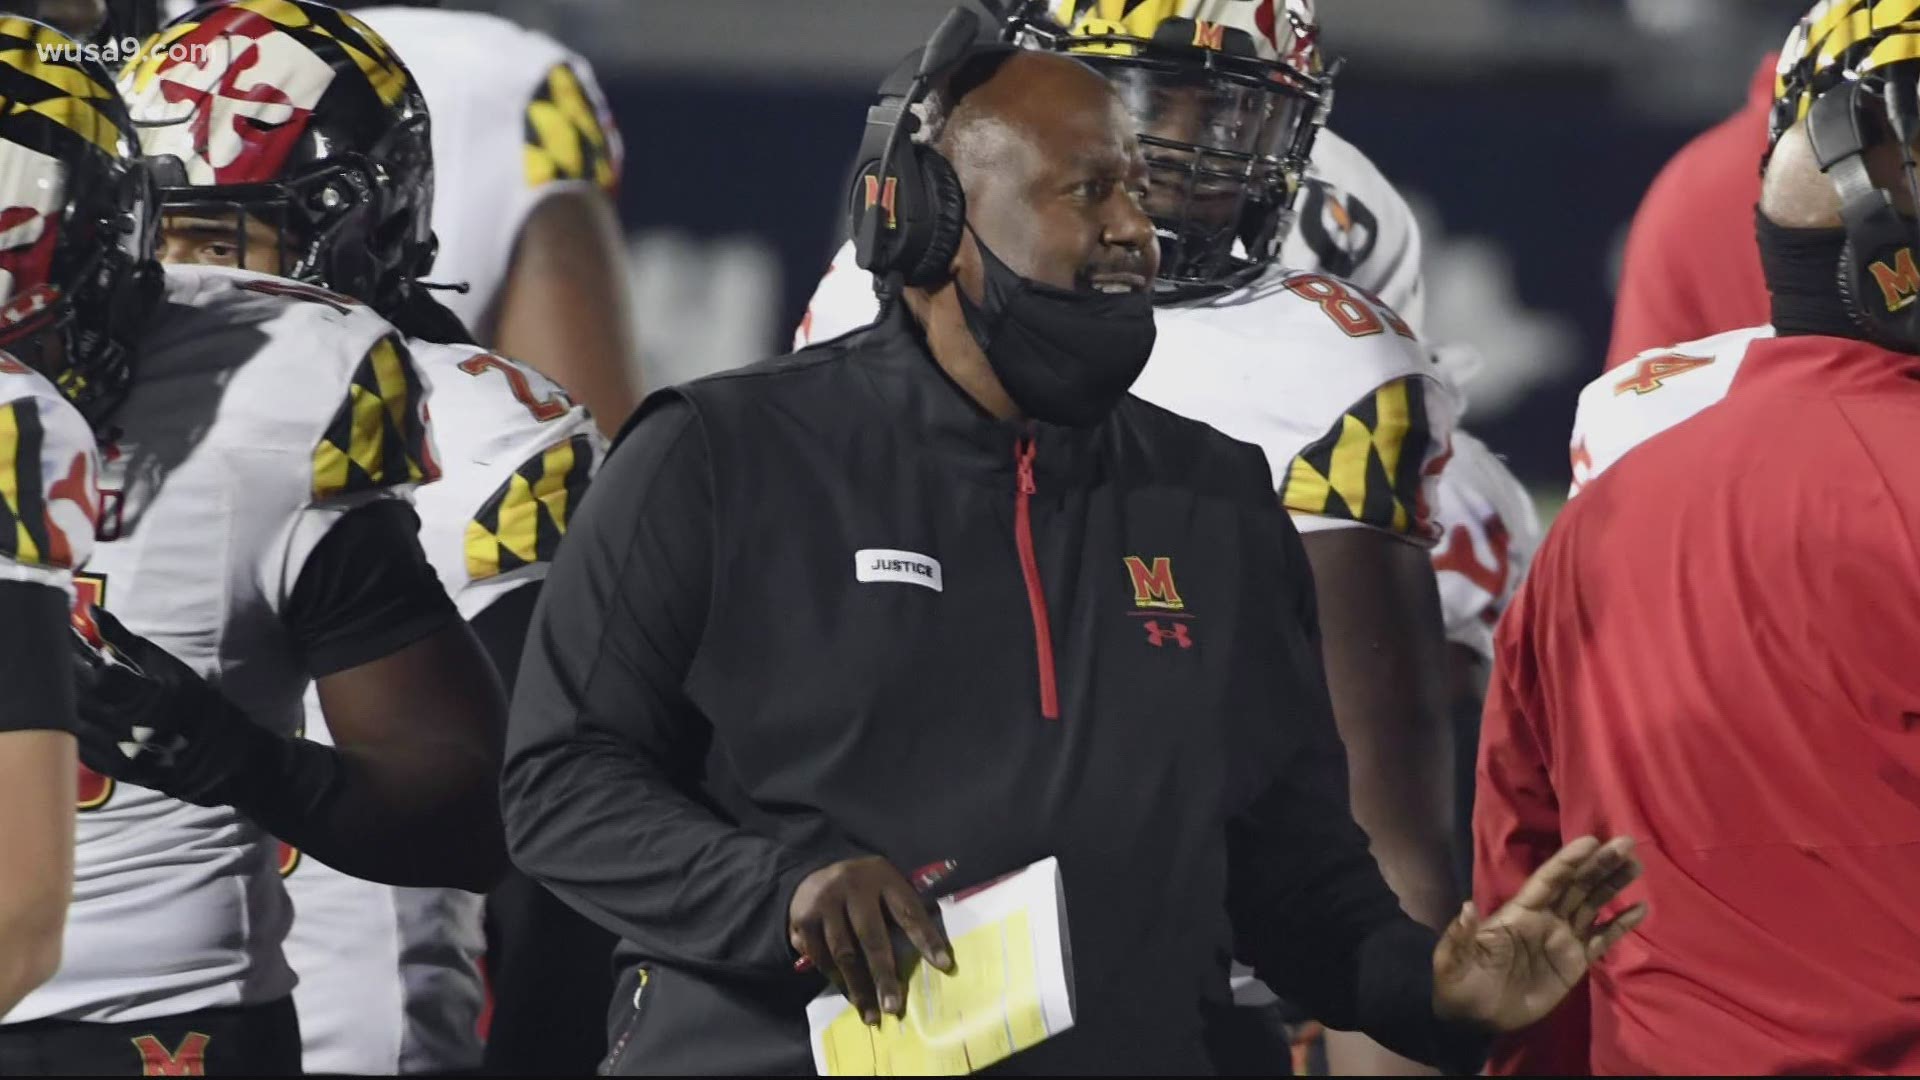 According to the University of Maryland Athletics, the game against Michigan State will not be rescheduled.